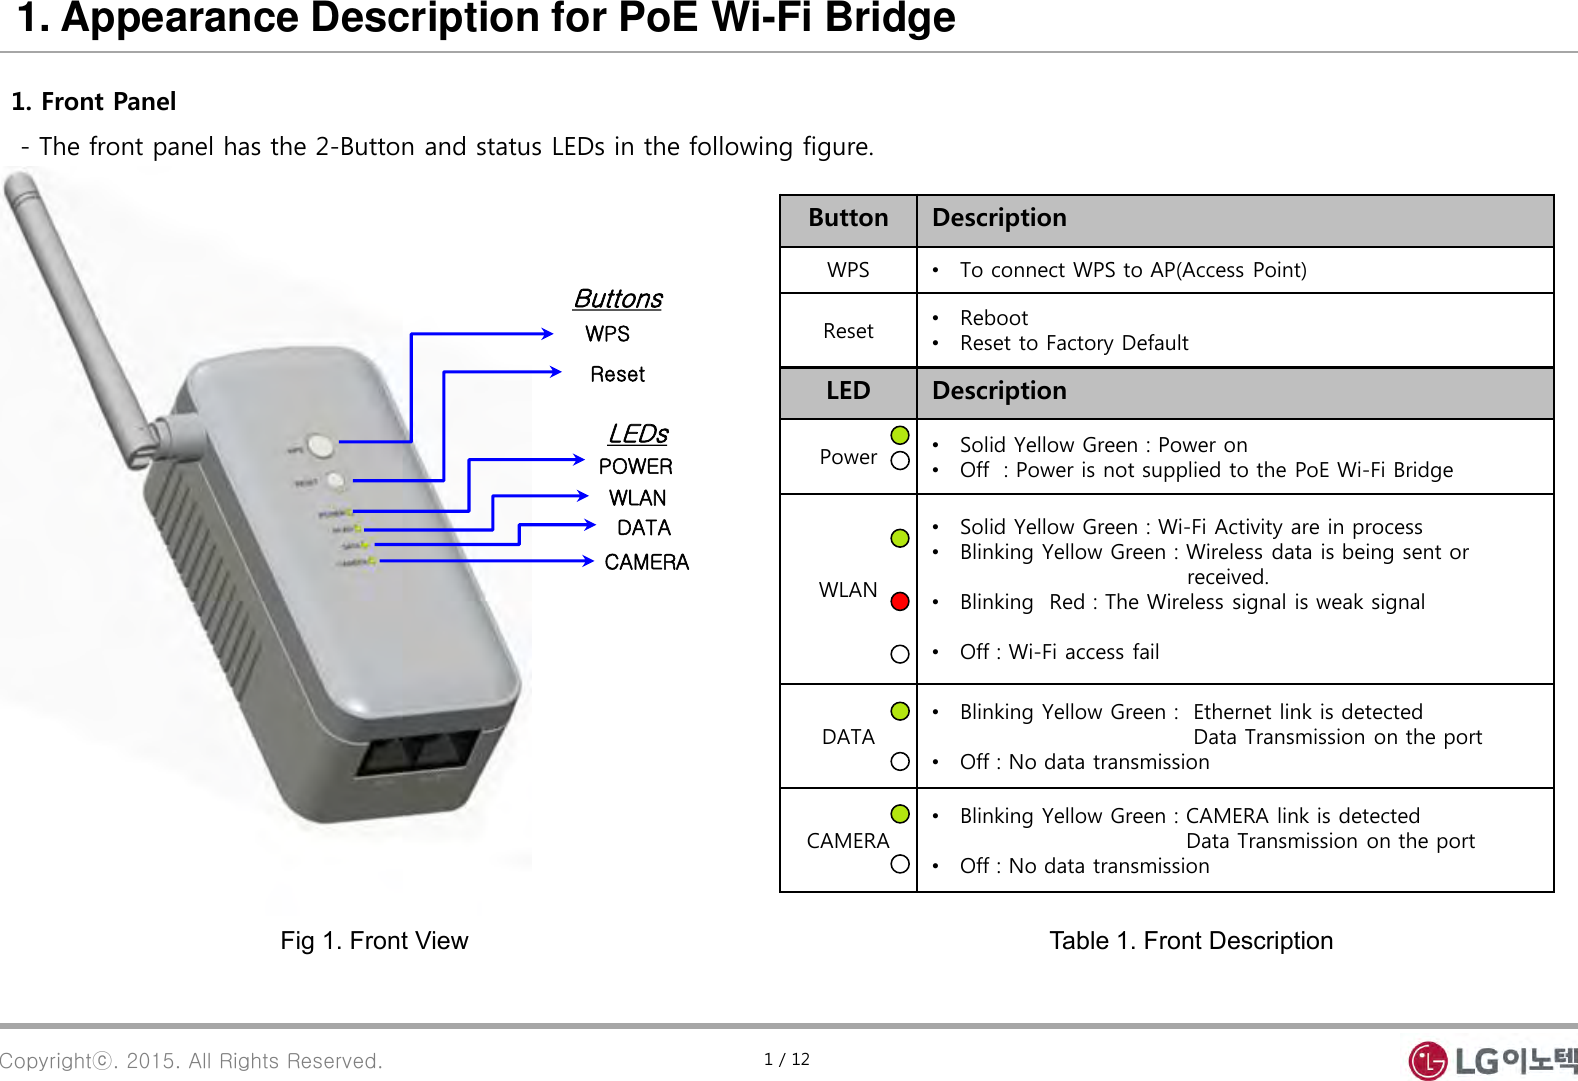 Copyrightⓒ. 2015. All Rights Reserved. 1. Appearance Description for PoE Wi-Fi Bridge    WPS  Reset Fig 1. Front View  1. Front Panel   - The front panel has the 2-Button and status LEDs in the following figure. LEDs   POWER   WLAN   DATA  CAMERA Buttons Button  Description WPS  •To connect WPS to AP(Access Point) Reset  •Reboot •Reset to Factory Default LED  Description Power  •Solid Yellow Green : Power on •Off  : Power is not supplied to the PoE Wi-Fi Bridge WLAN •Solid Yellow Green : Wi-Fi Activity are in process •Blinking Yellow Green : Wireless data is being sent or                                       received. •Blinking  Red : The Wireless signal is weak signal                       •Off : Wi-Fi access fail DATA •Blinking Yellow Green :  Ethernet link is detected                                  Data Transmission on the port •Off : No data transmission CAMERA •Blinking Yellow Green : CAMERA link is detected                                 Data Transmission on the port •Off : No data transmission Table 1. Front Description 1 / 12 